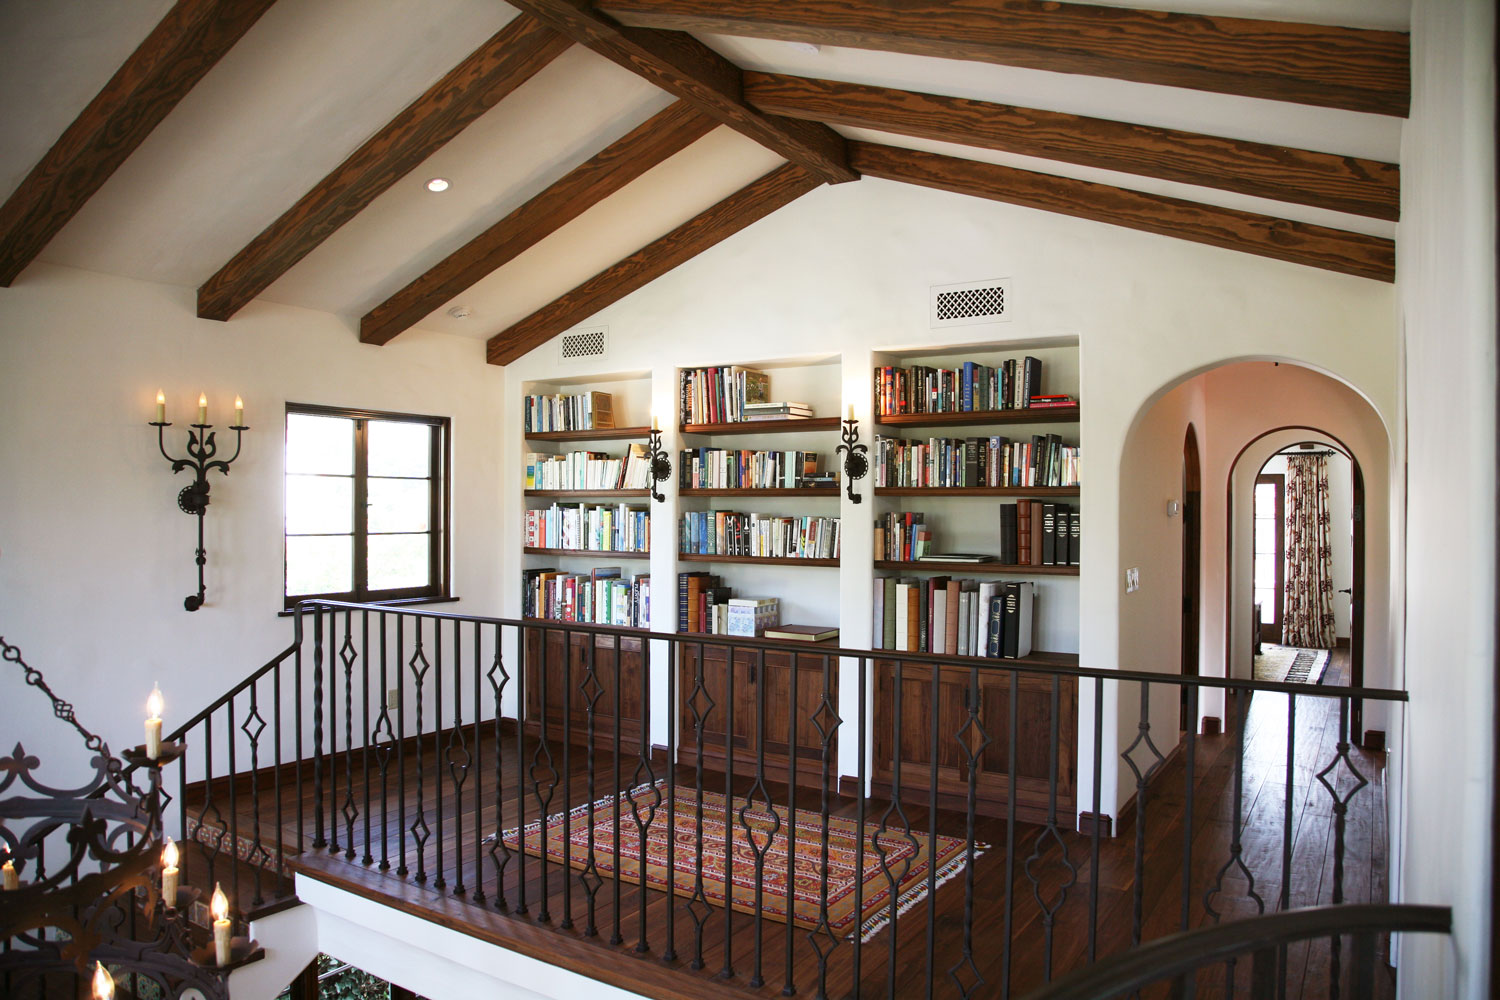 10-spanish-style-staircase-landing-beamed-ceiling-built-in-bookcases-gary-drake-general-contractor.jpg